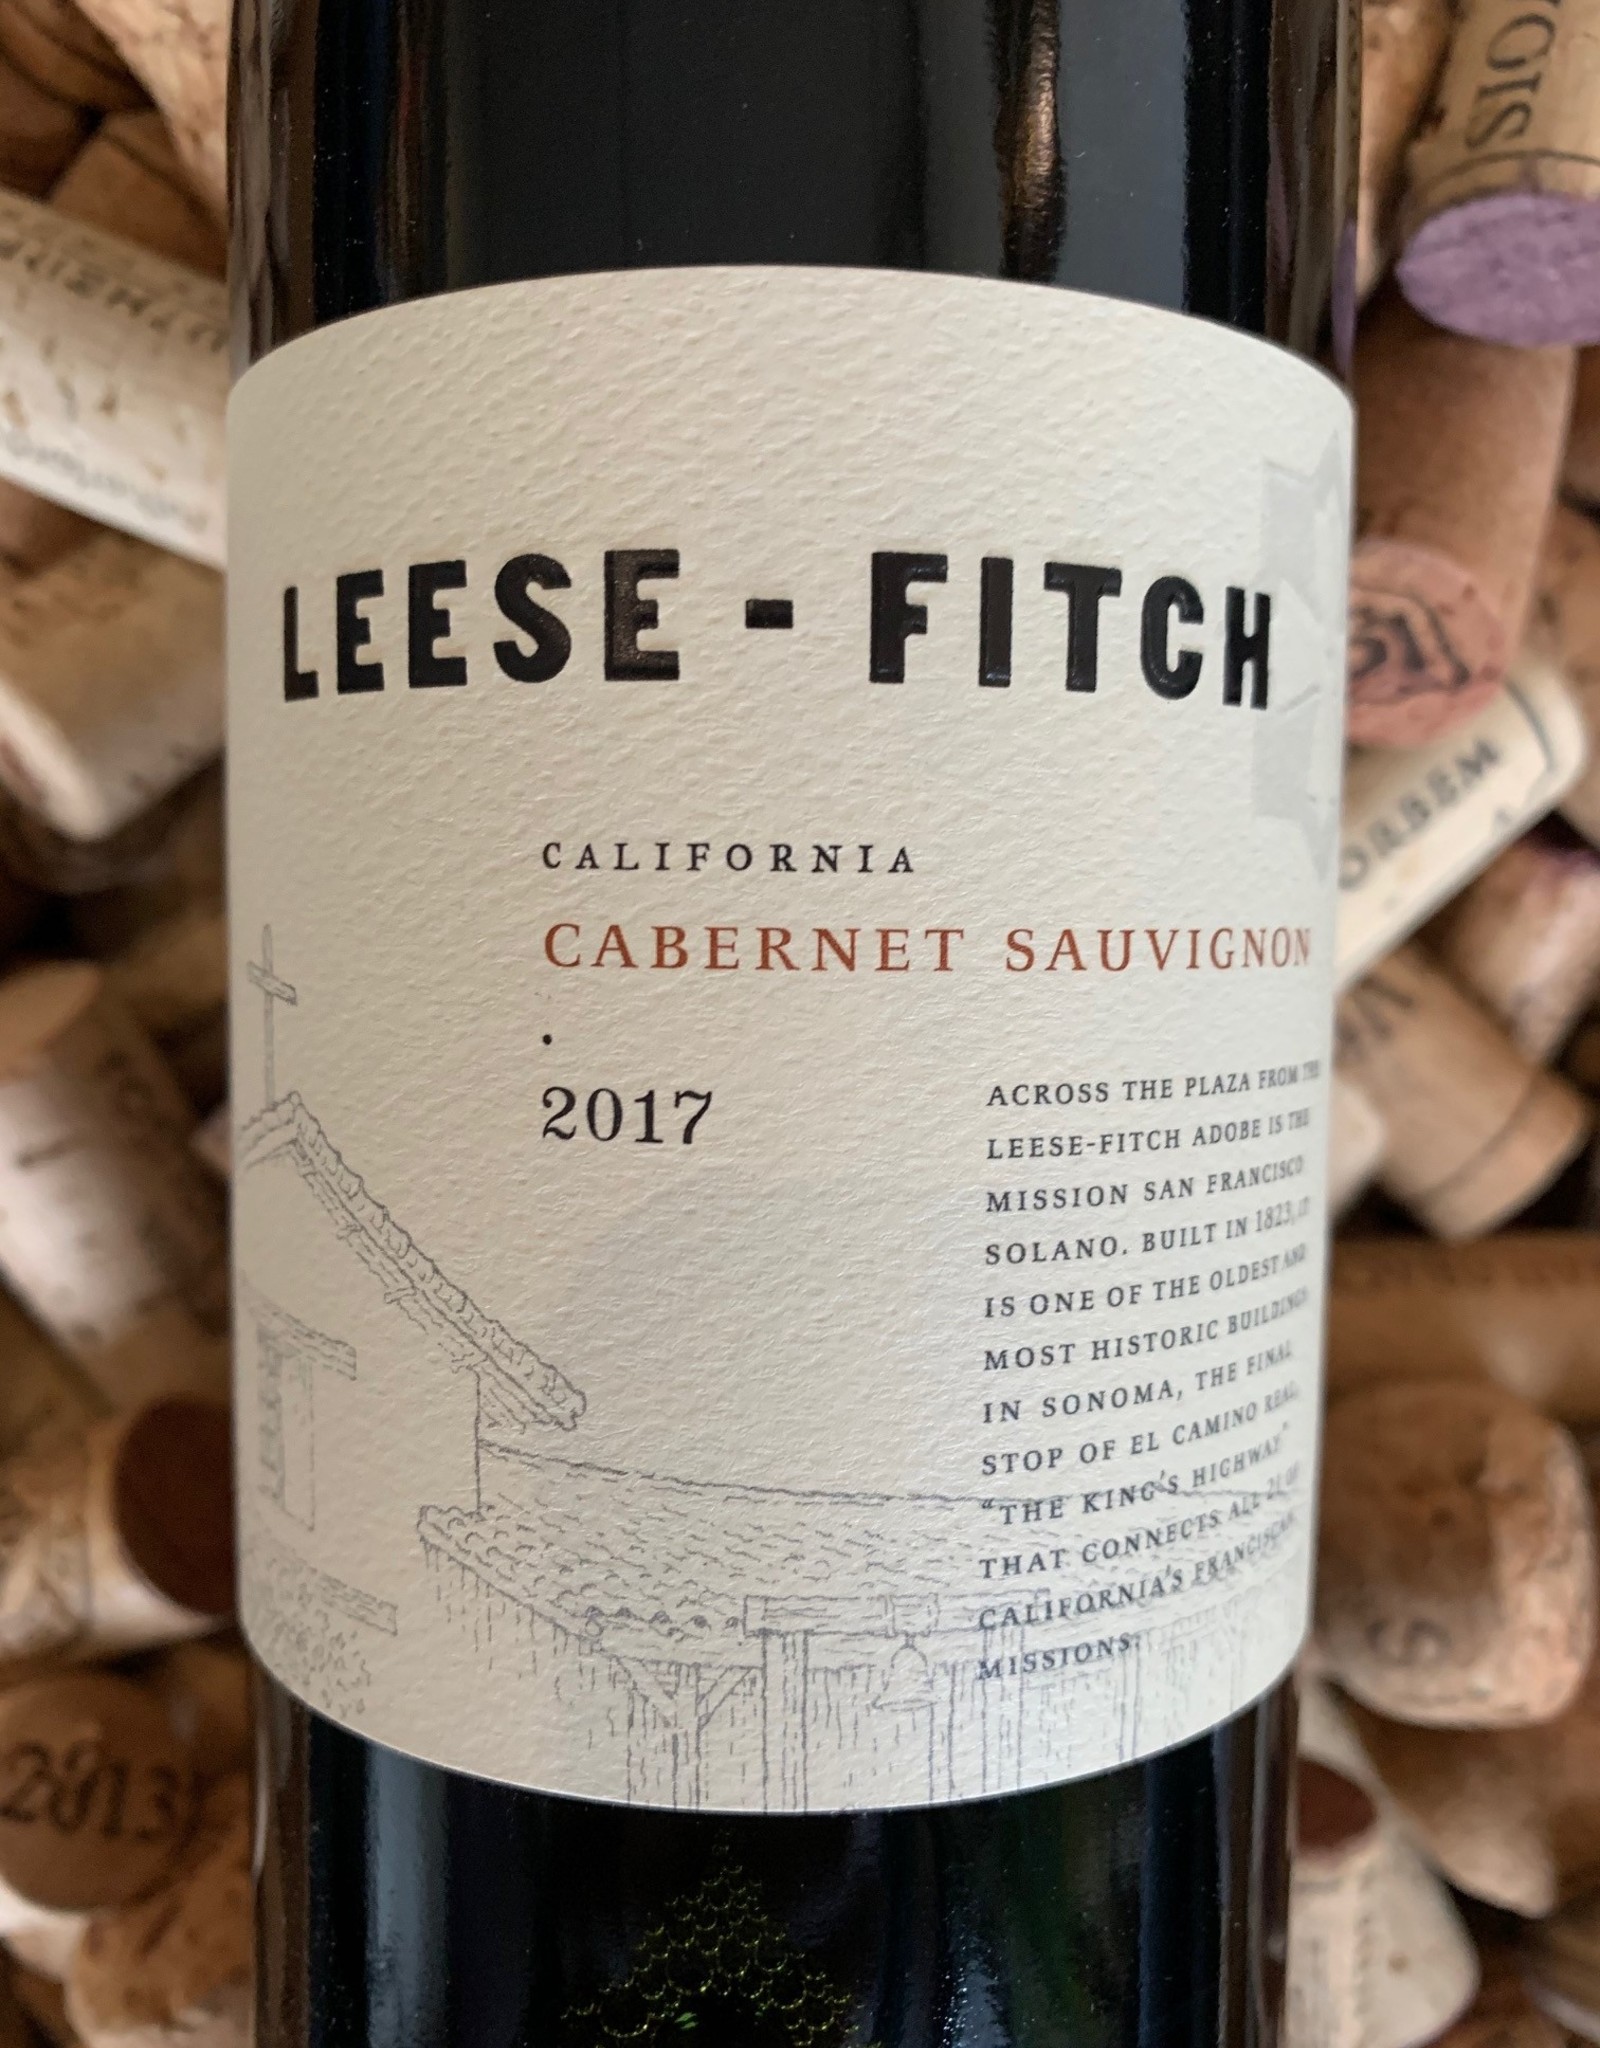 Lee's Fitch Leese Fitch Cabernet Sauvignon California